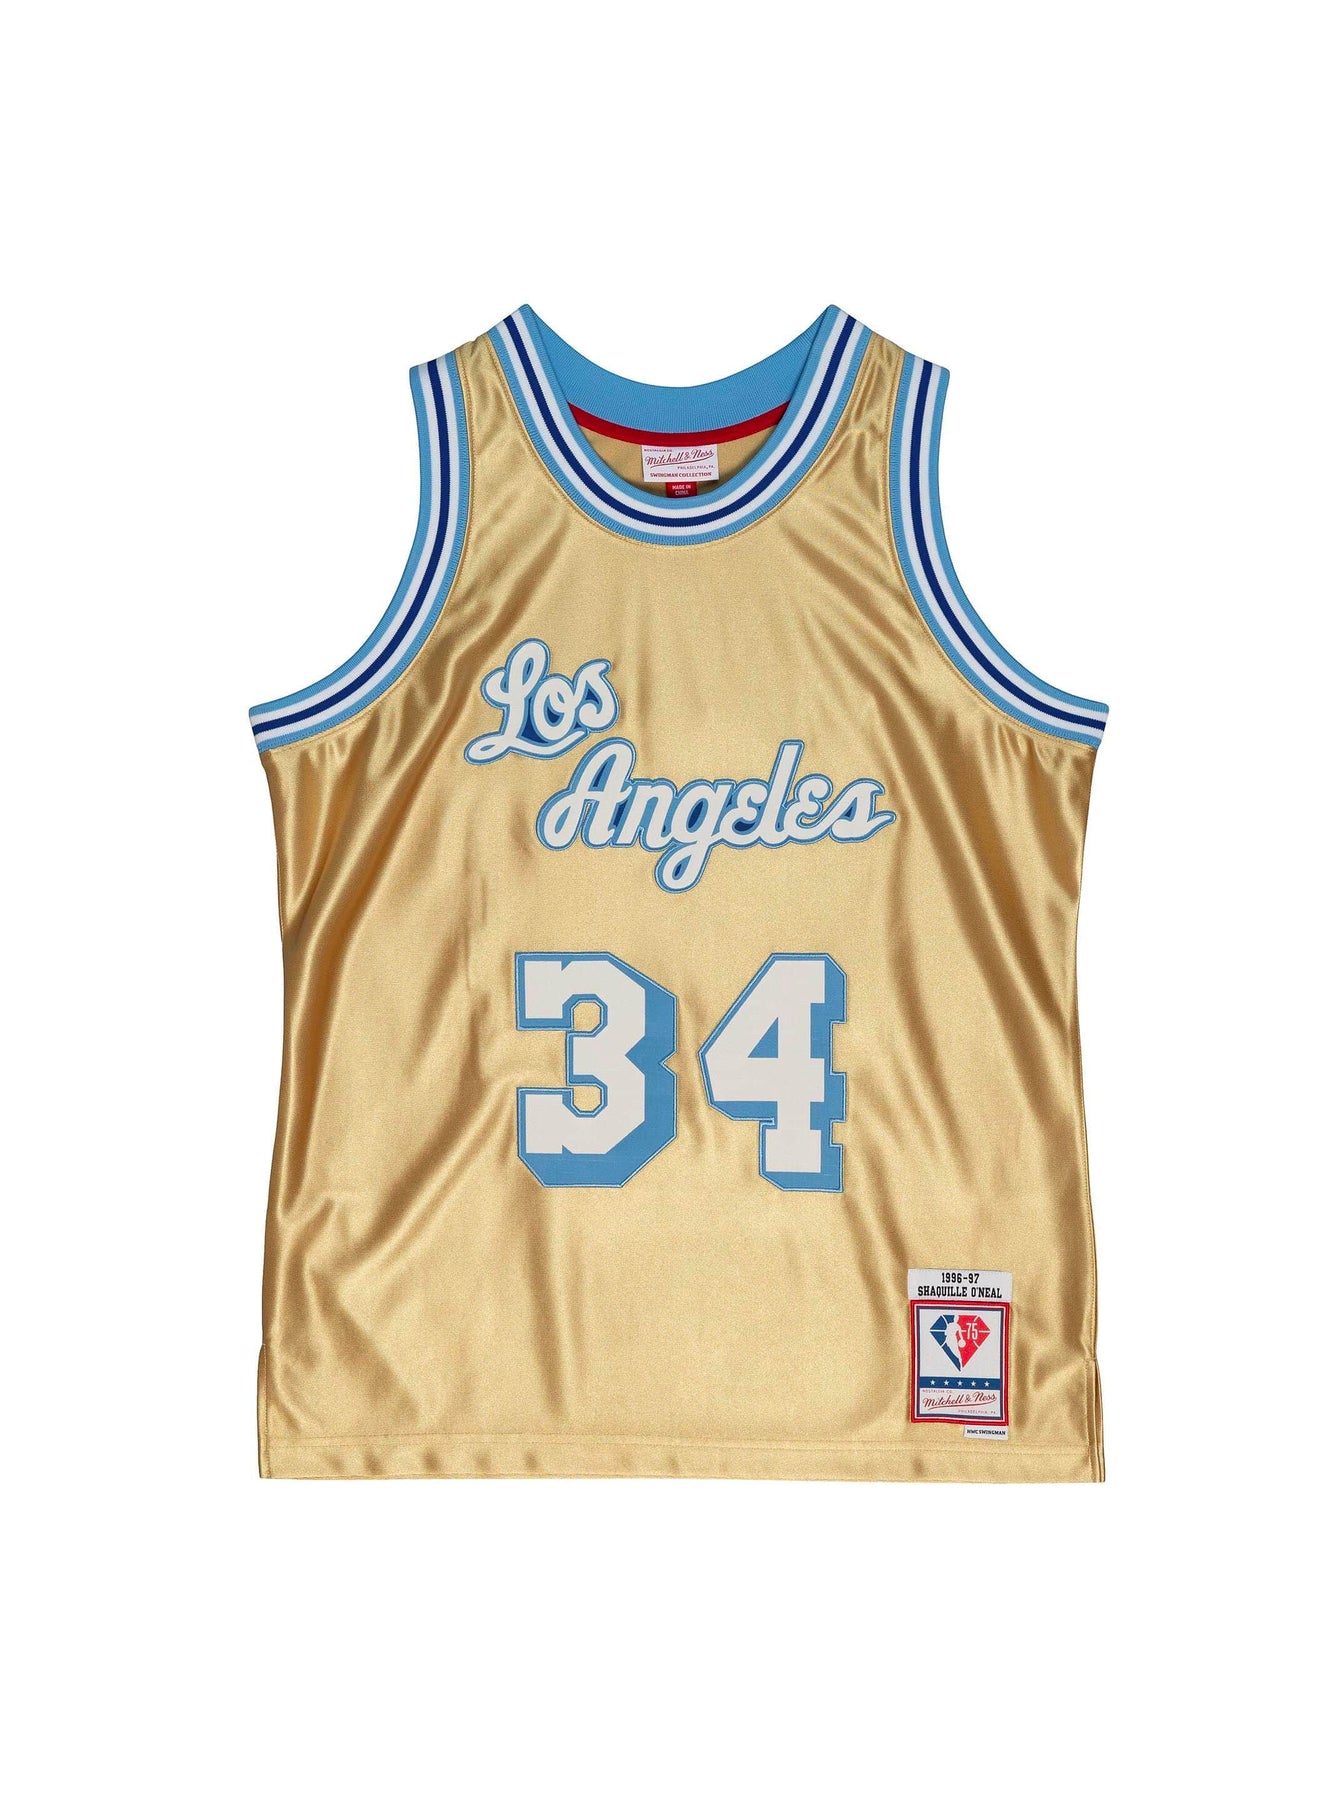 NBA Swingman Jersey Los Angeles Lakers Home 1996-97 Shaquille O